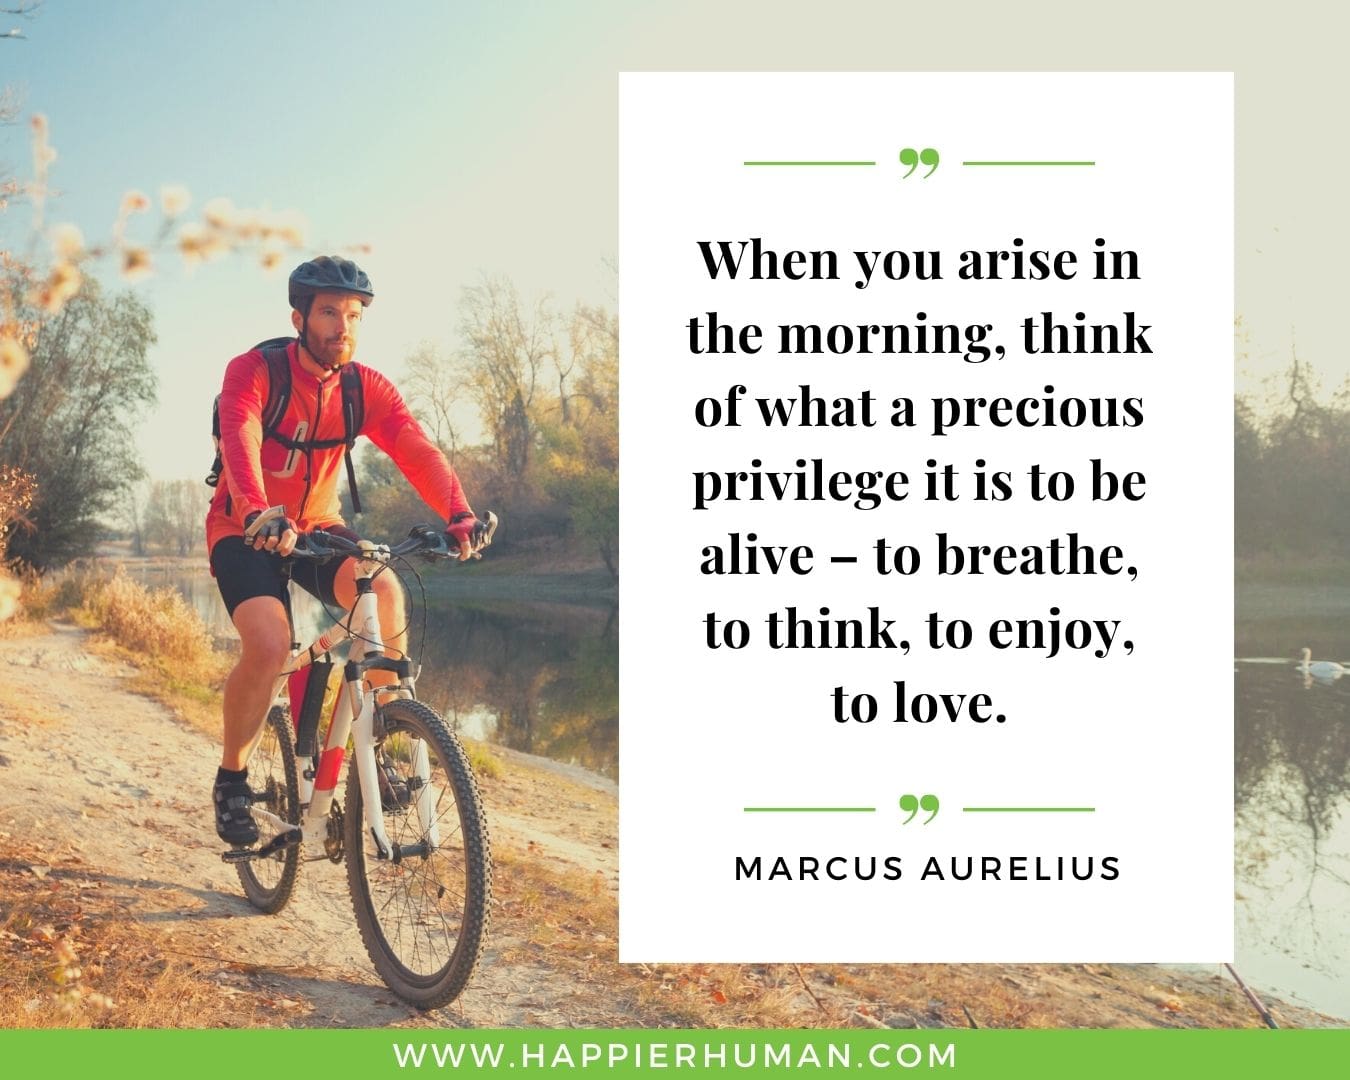 Great Day Quotes - “When you arise in the morning, think of what a precious privilege it is to be alive – to breathe, to think, to enjoy, to love.” – Marcus Aurelius